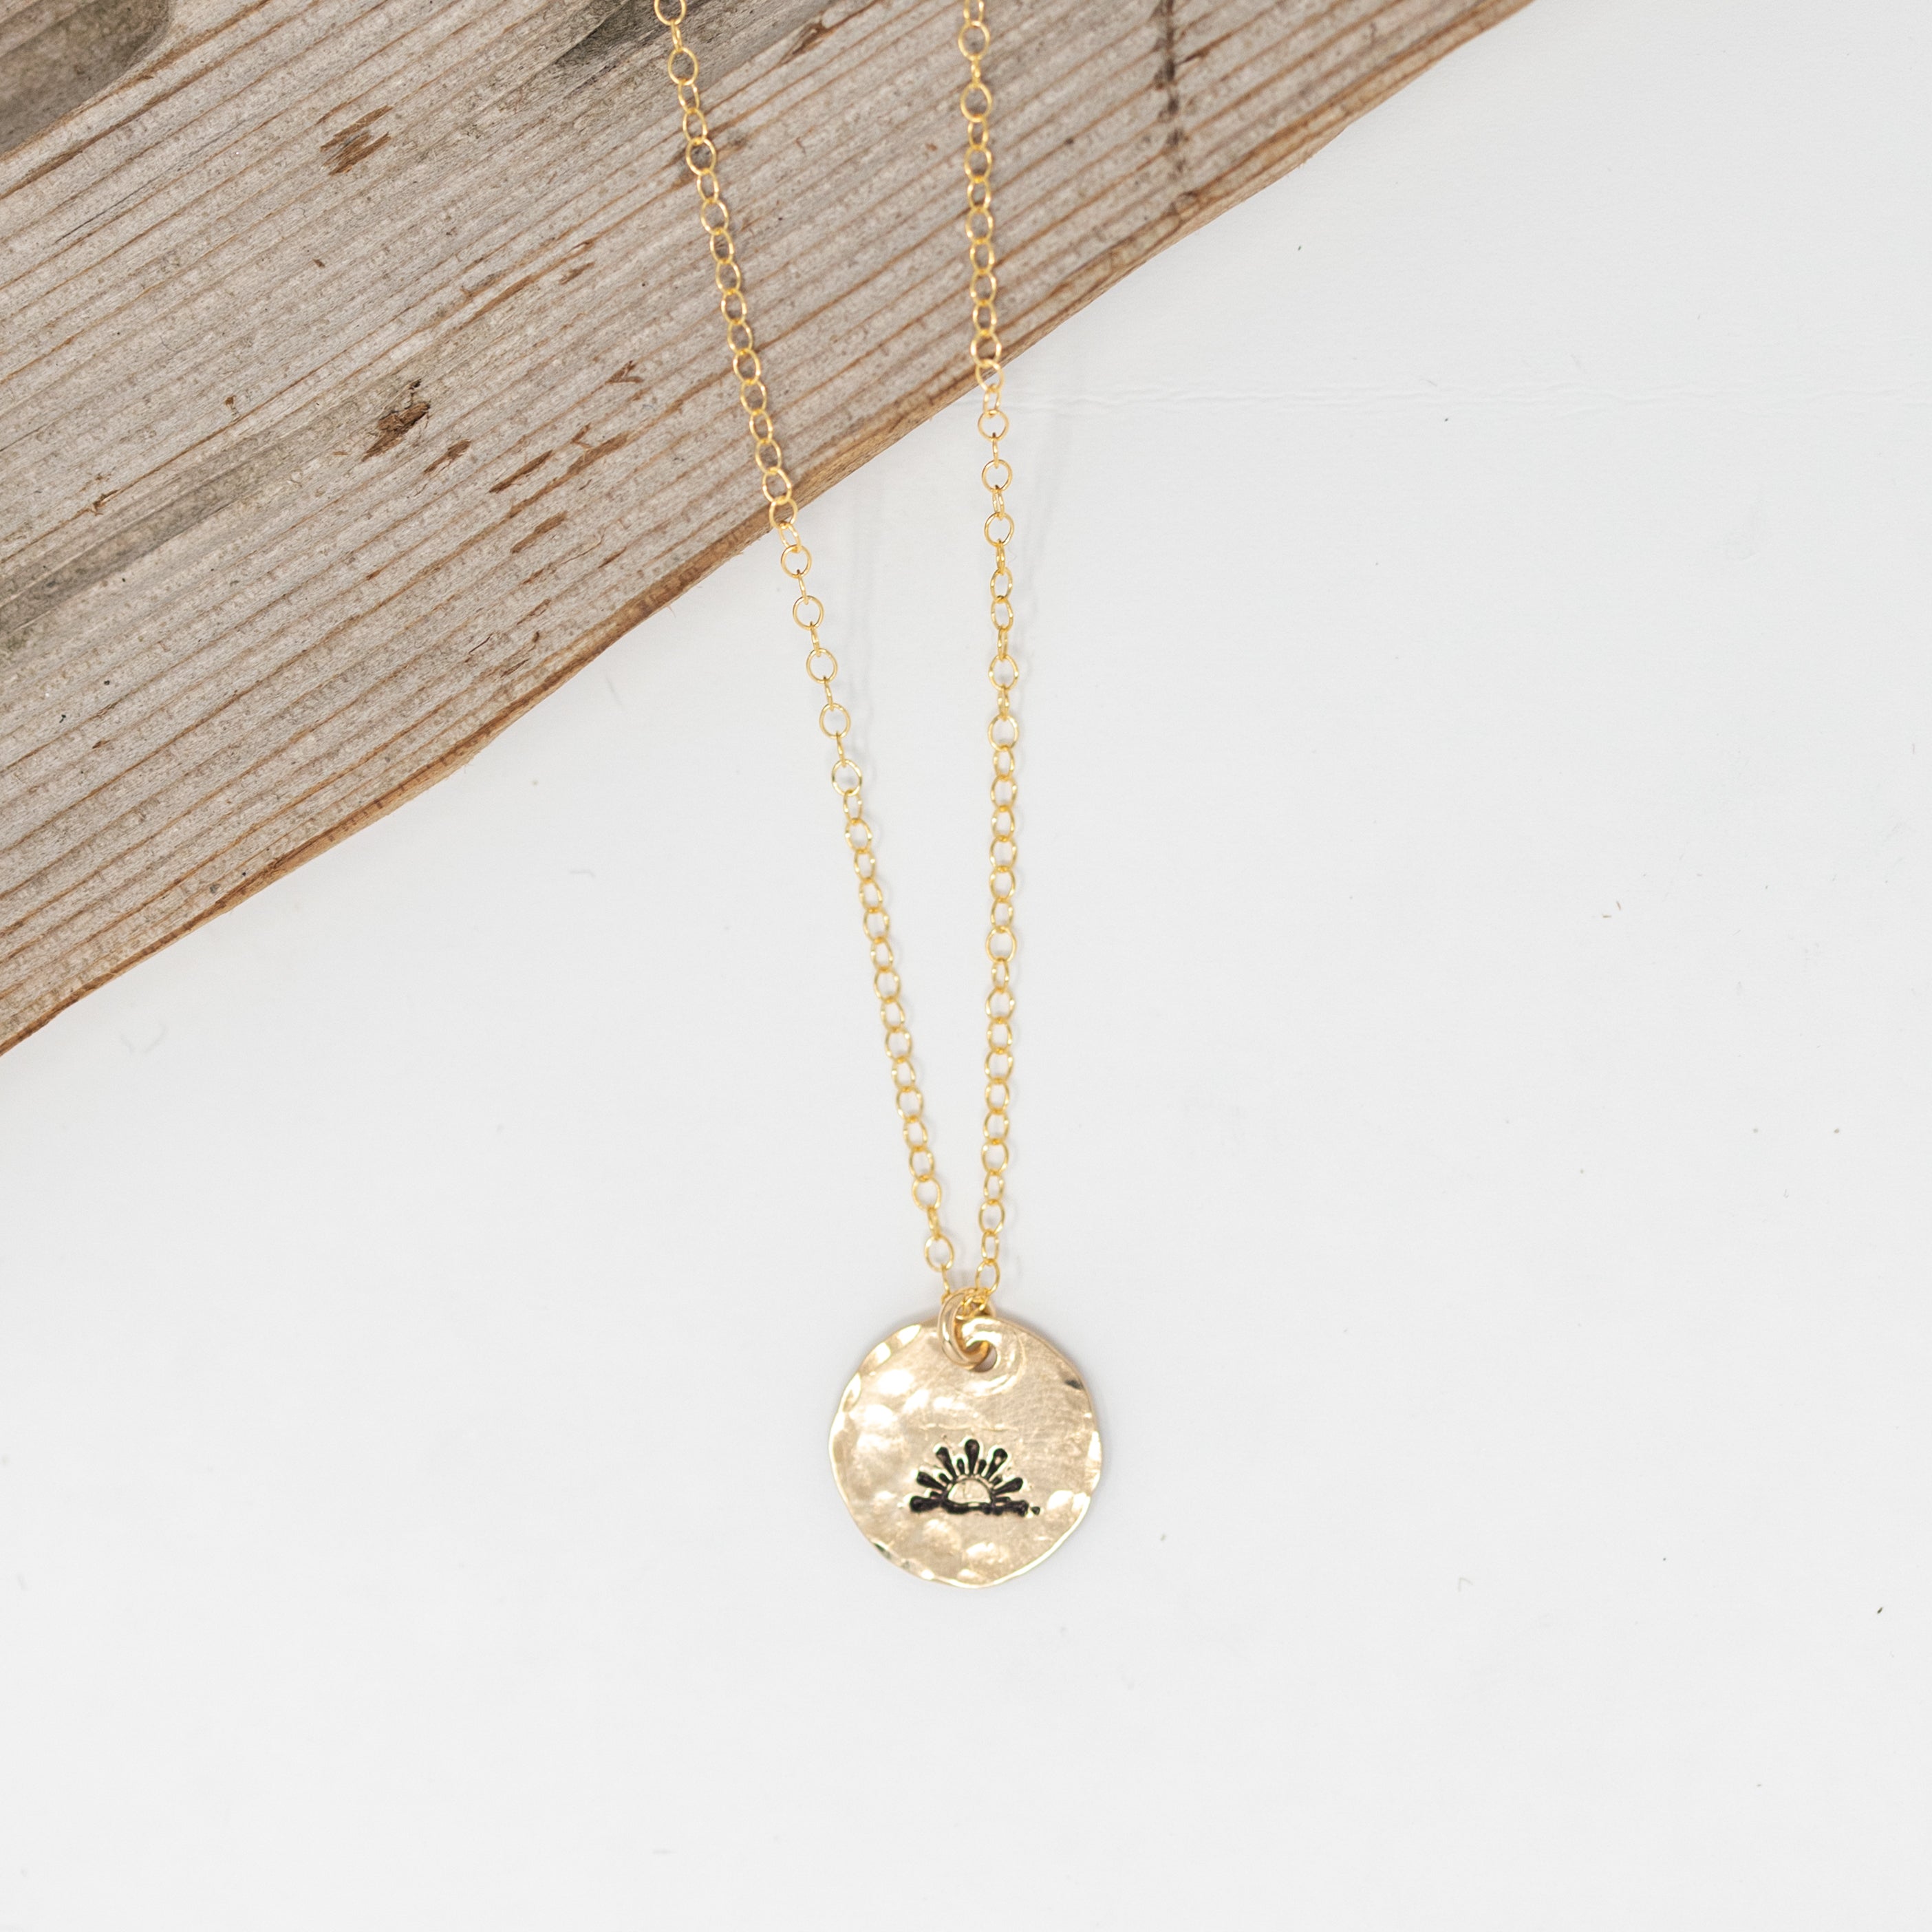 Hand-Stamped 'Sunset Chaser' Necklace